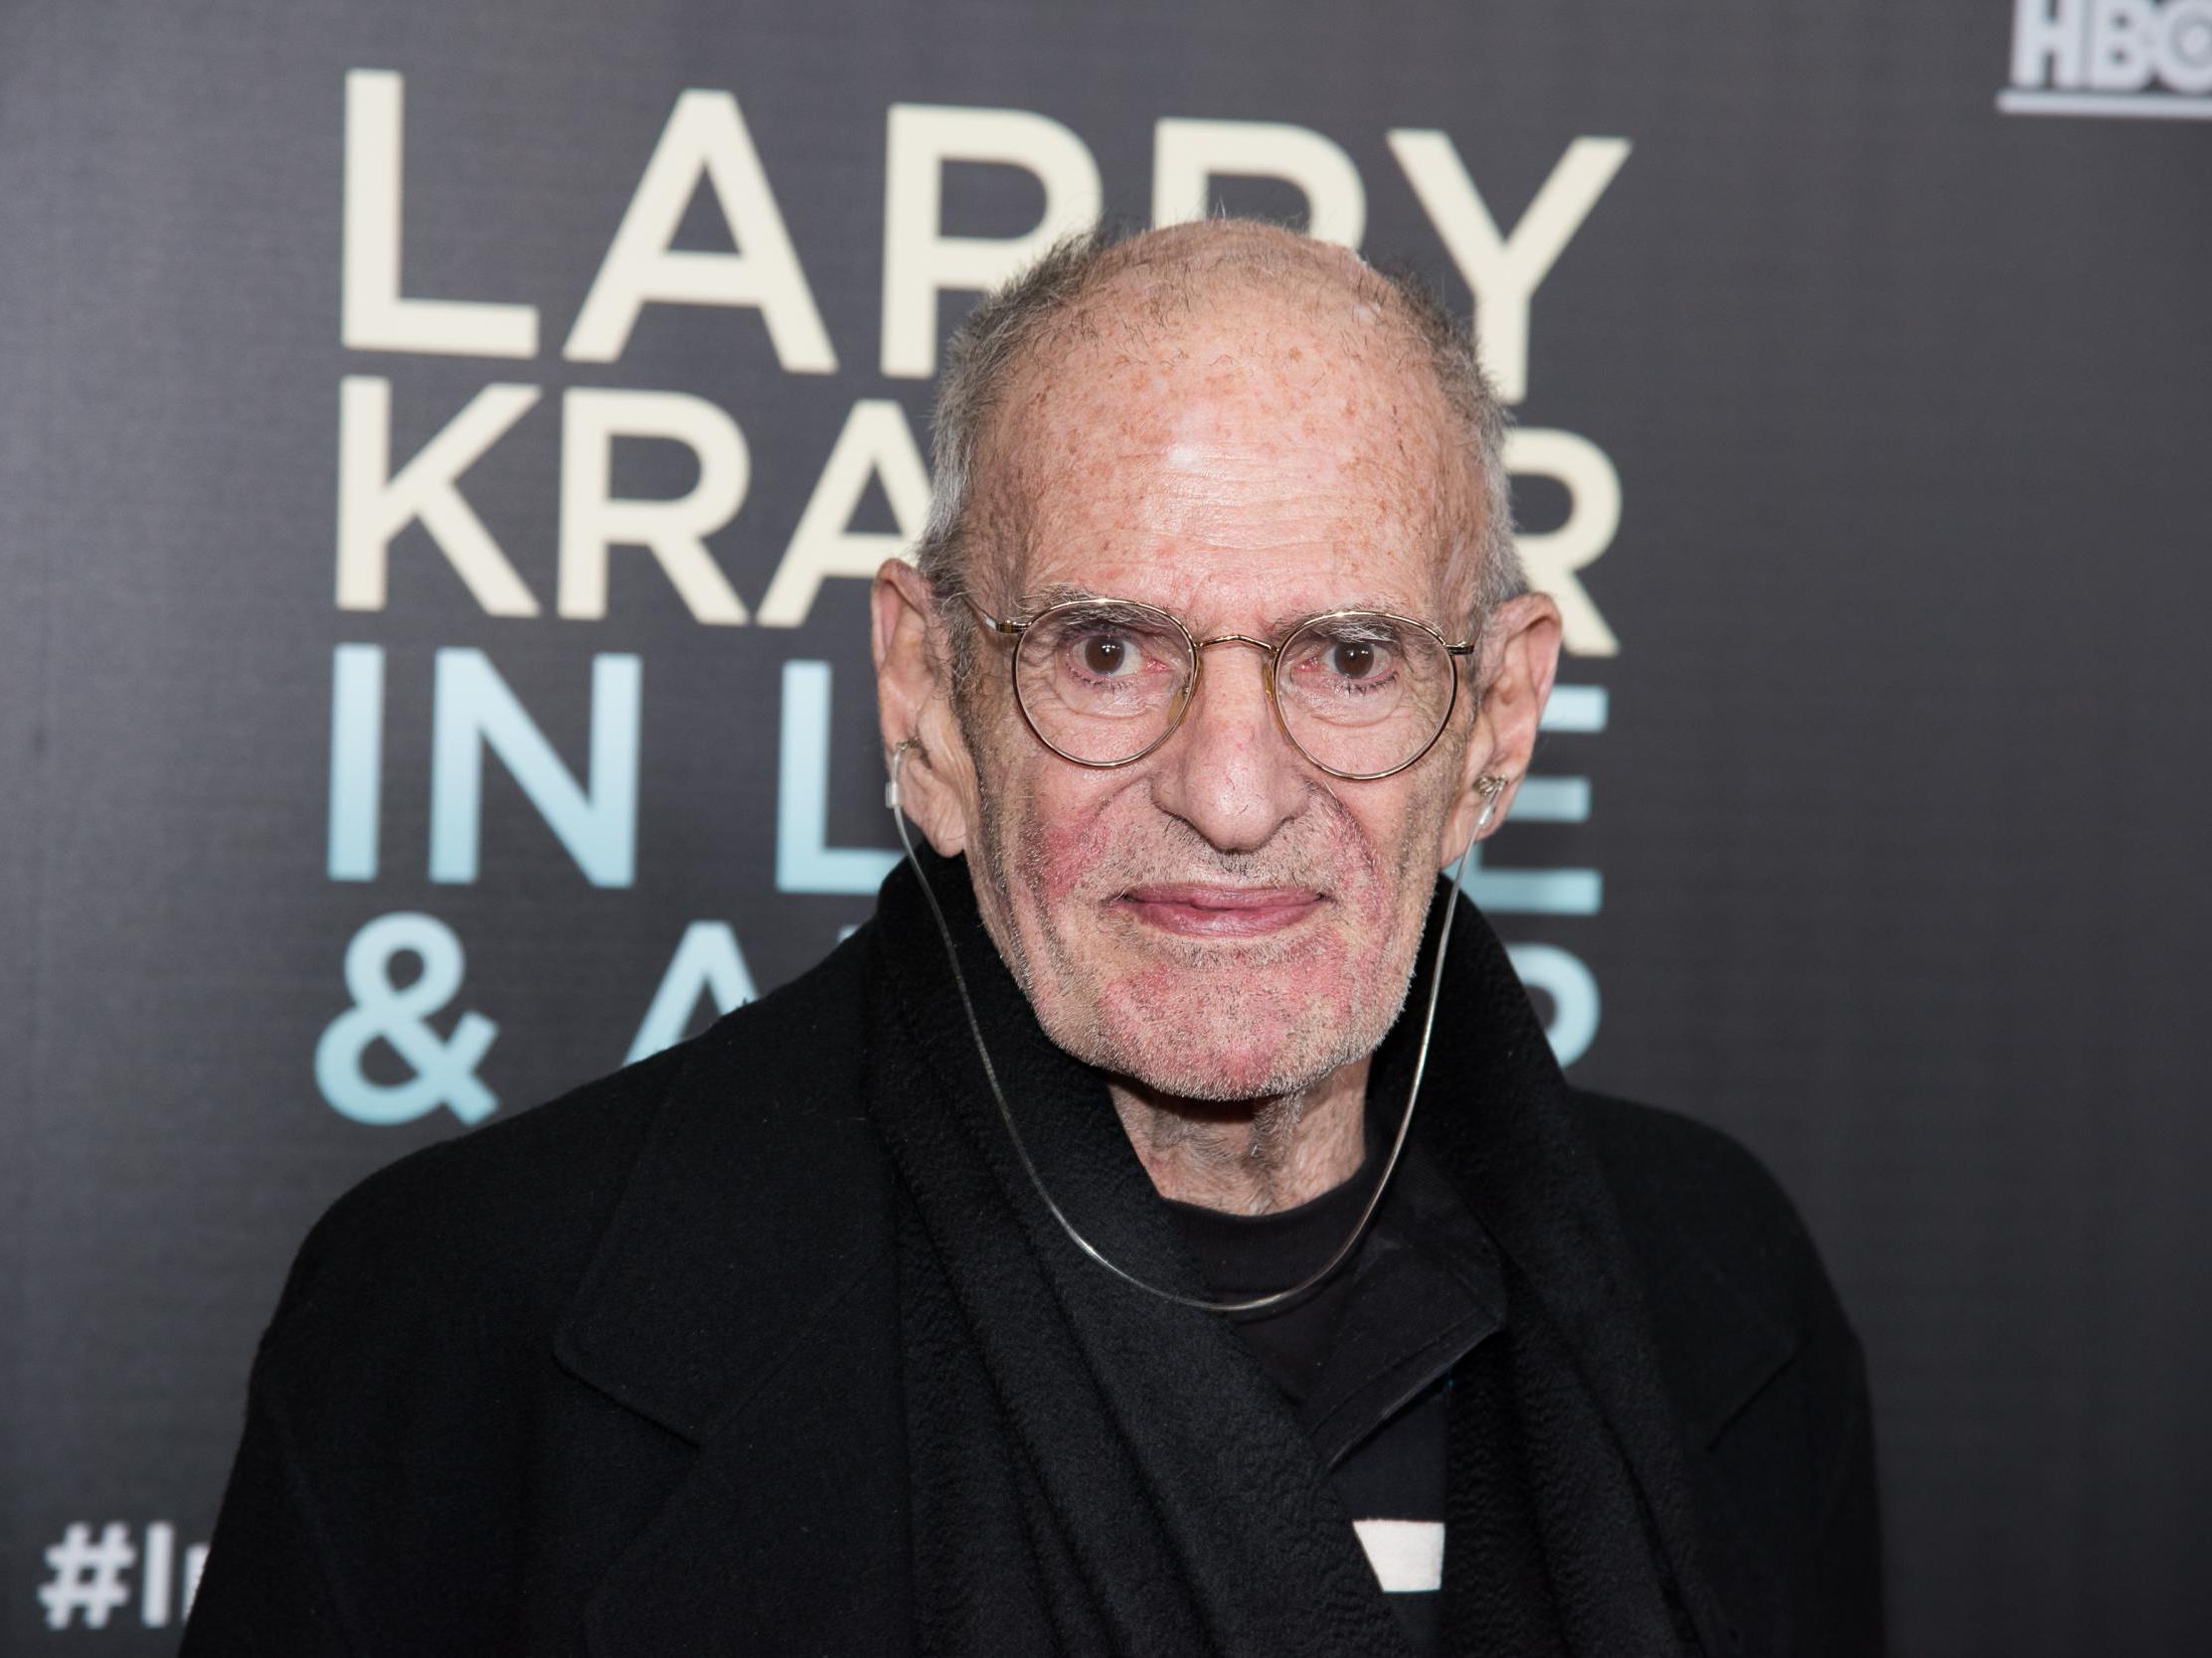 Author and activist Larry Kramer has died age 84